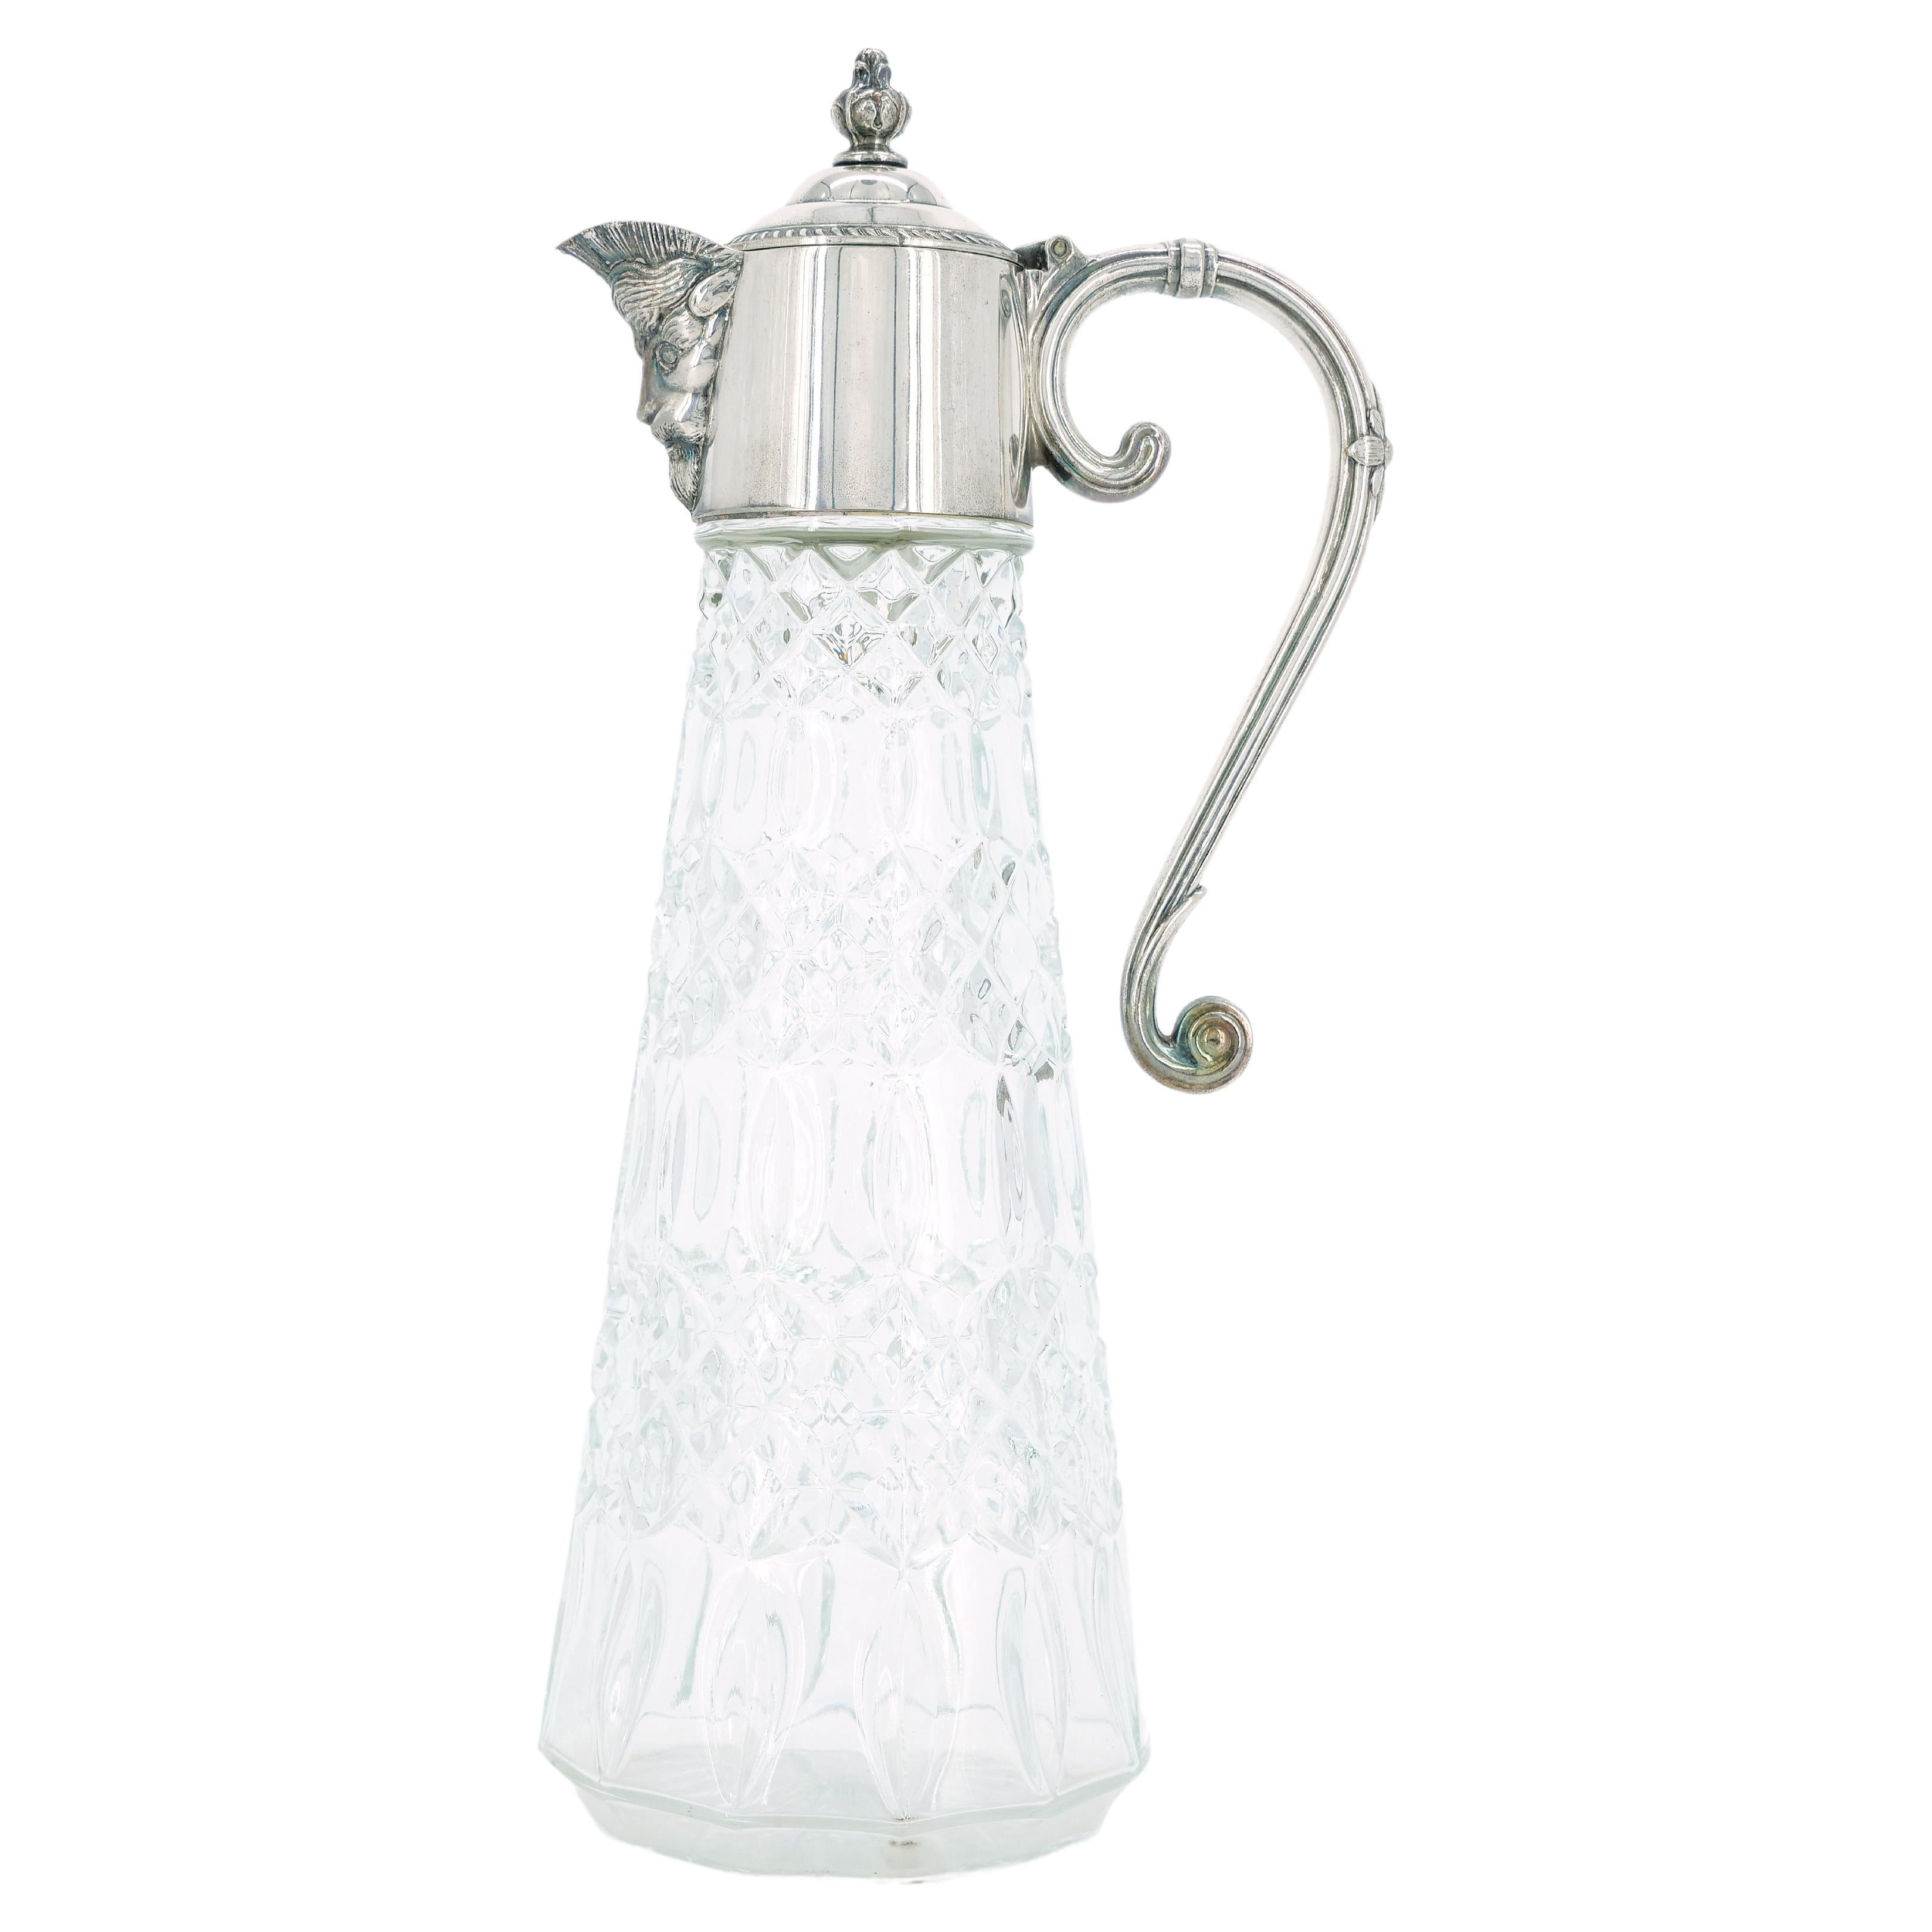 19th Century Silver Plate Holding Top / Cut Glass Claret Jug / Serving Pitcher